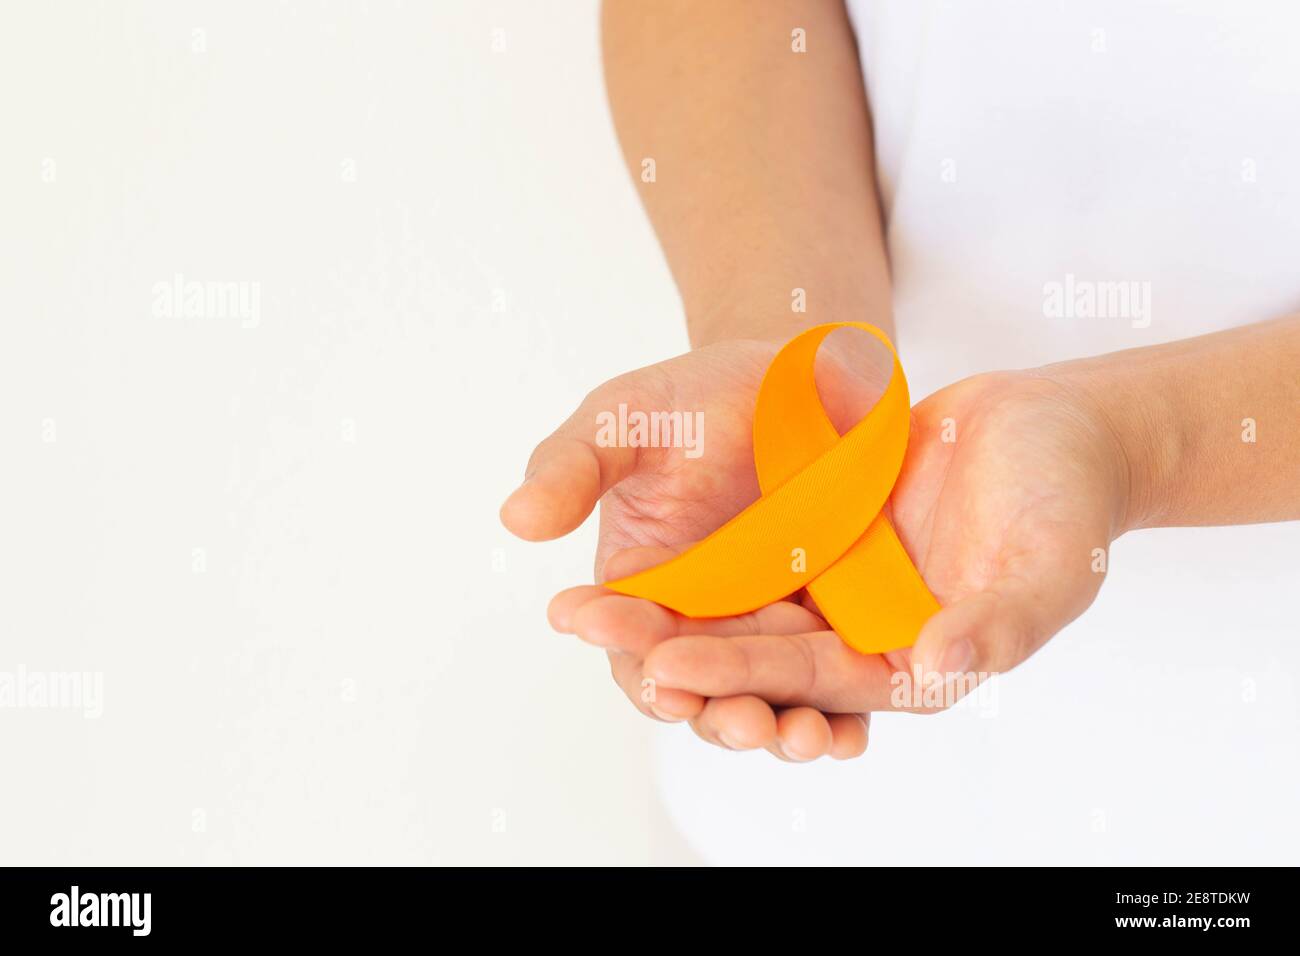 Hands holding orange color ribbon on white fabric with copy space. Kidney Cancer Awareness, Leukemia disease, Skin cancer awareness, World Cancer Day. Stock Photo